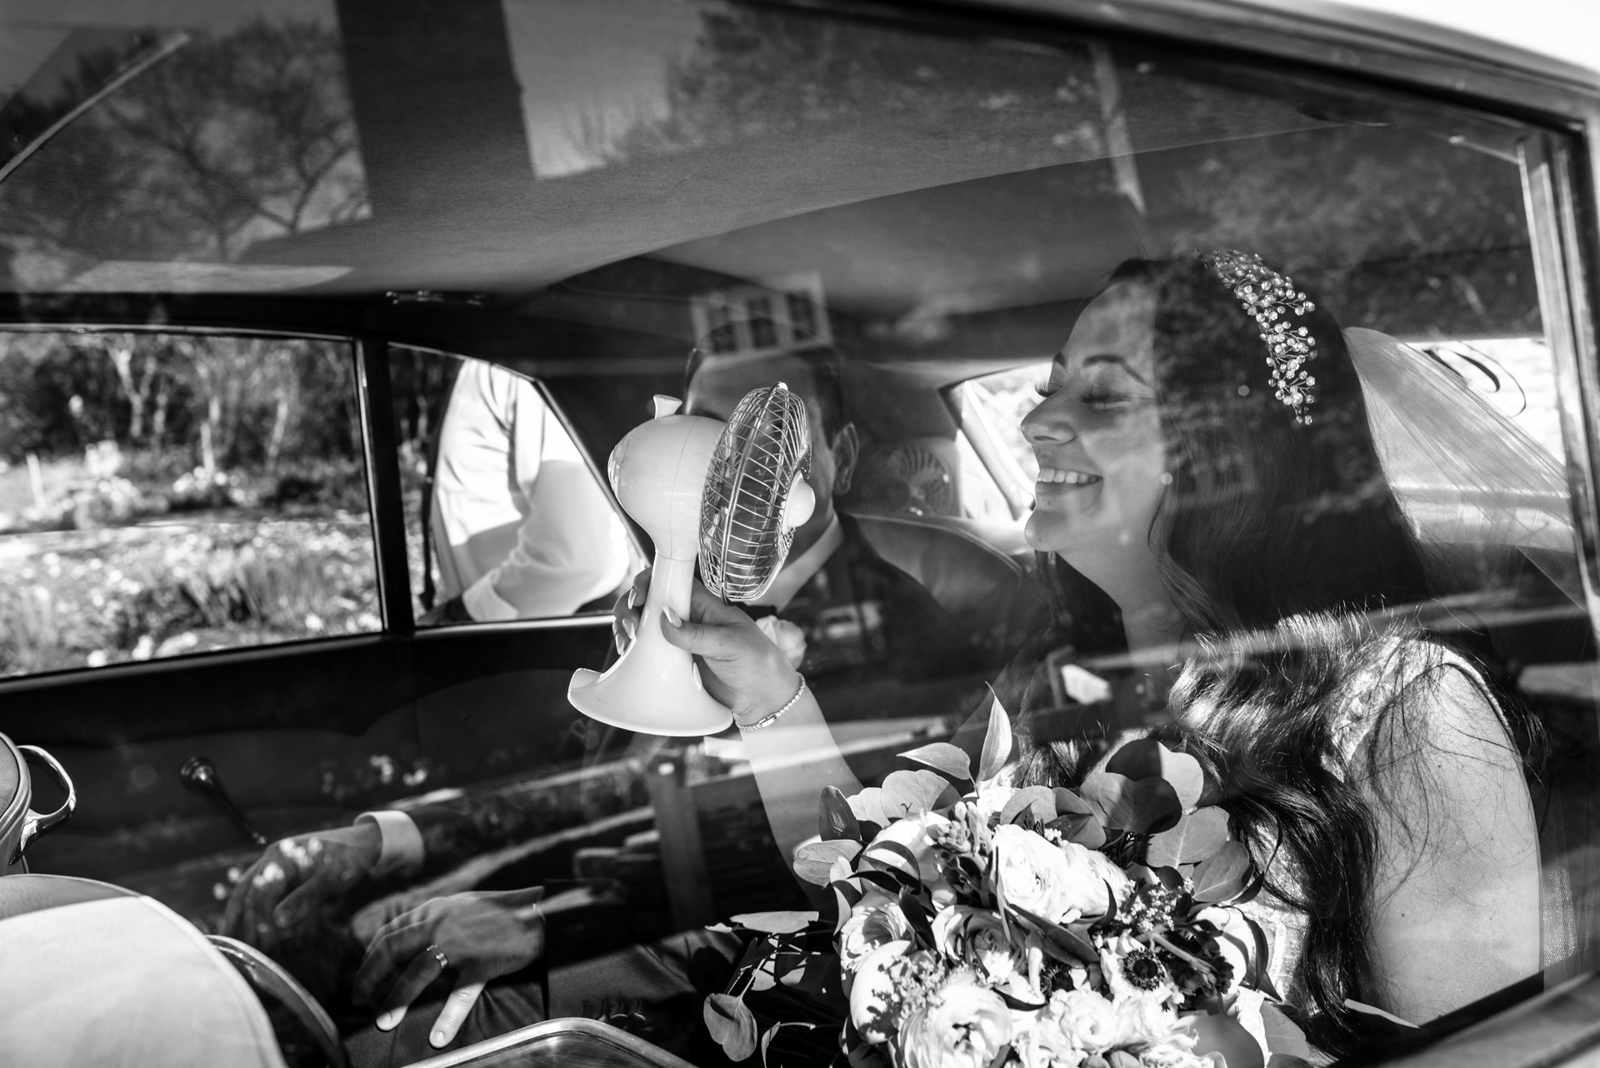 the bride is using the mini fan to cool her down in the hot car